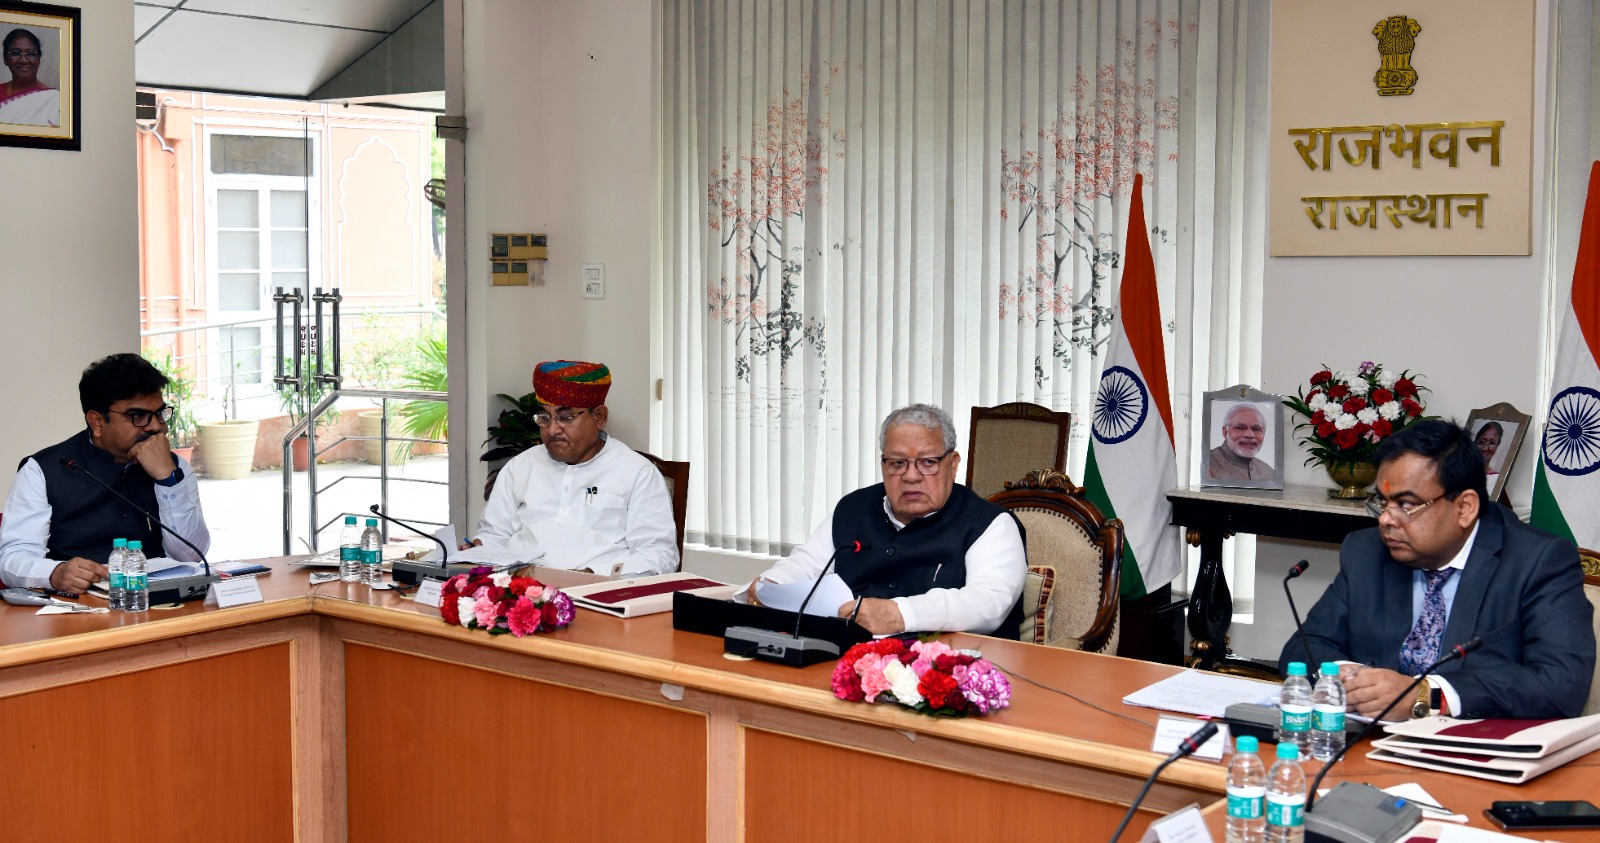 Hon'ble Governor has chaired meeting pertaining to Governor's Relief Fund